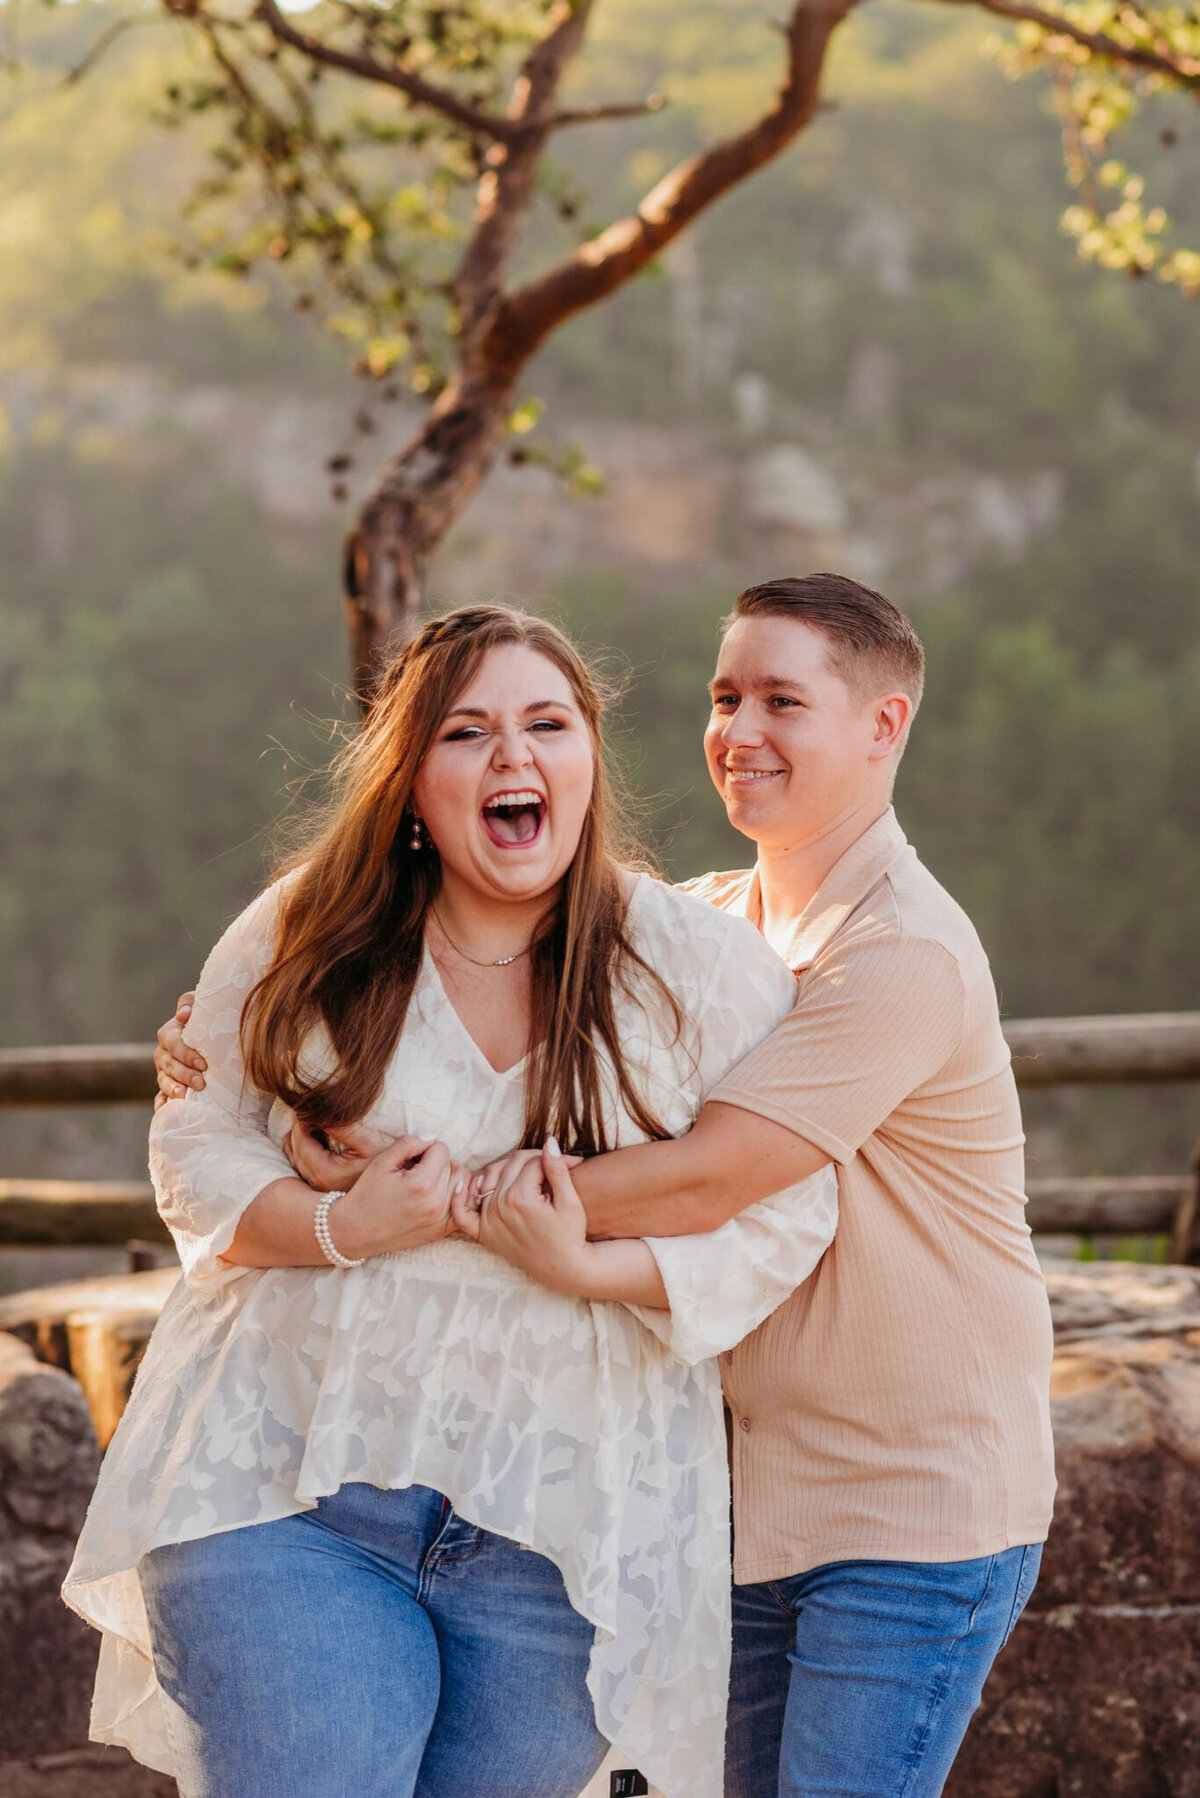 photo of woman laughing as her fiance hugs her